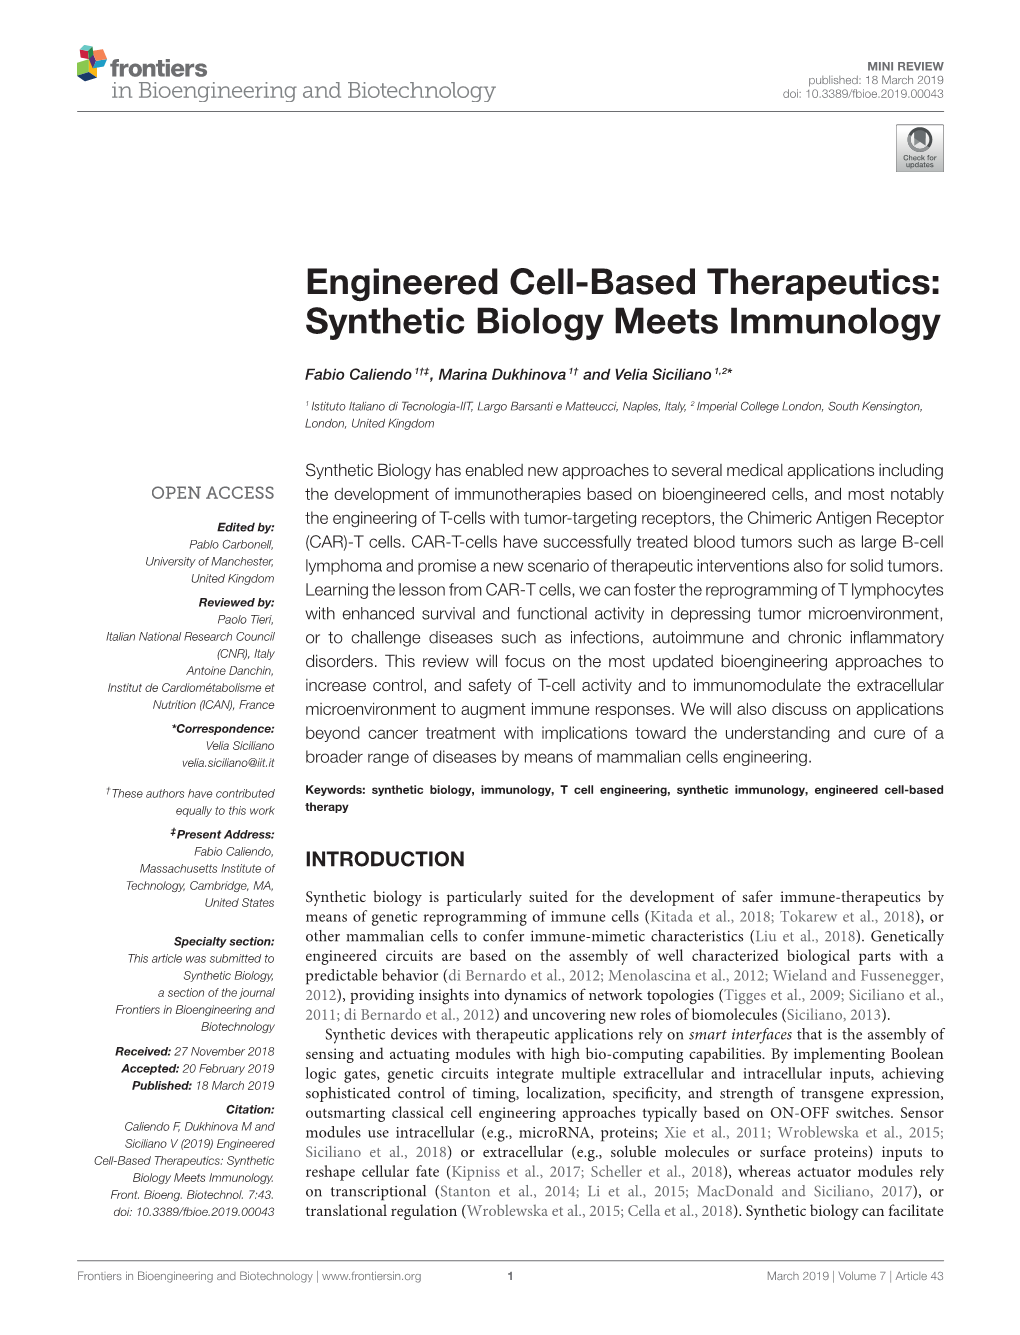 Synthetic Biology Meets Immunology